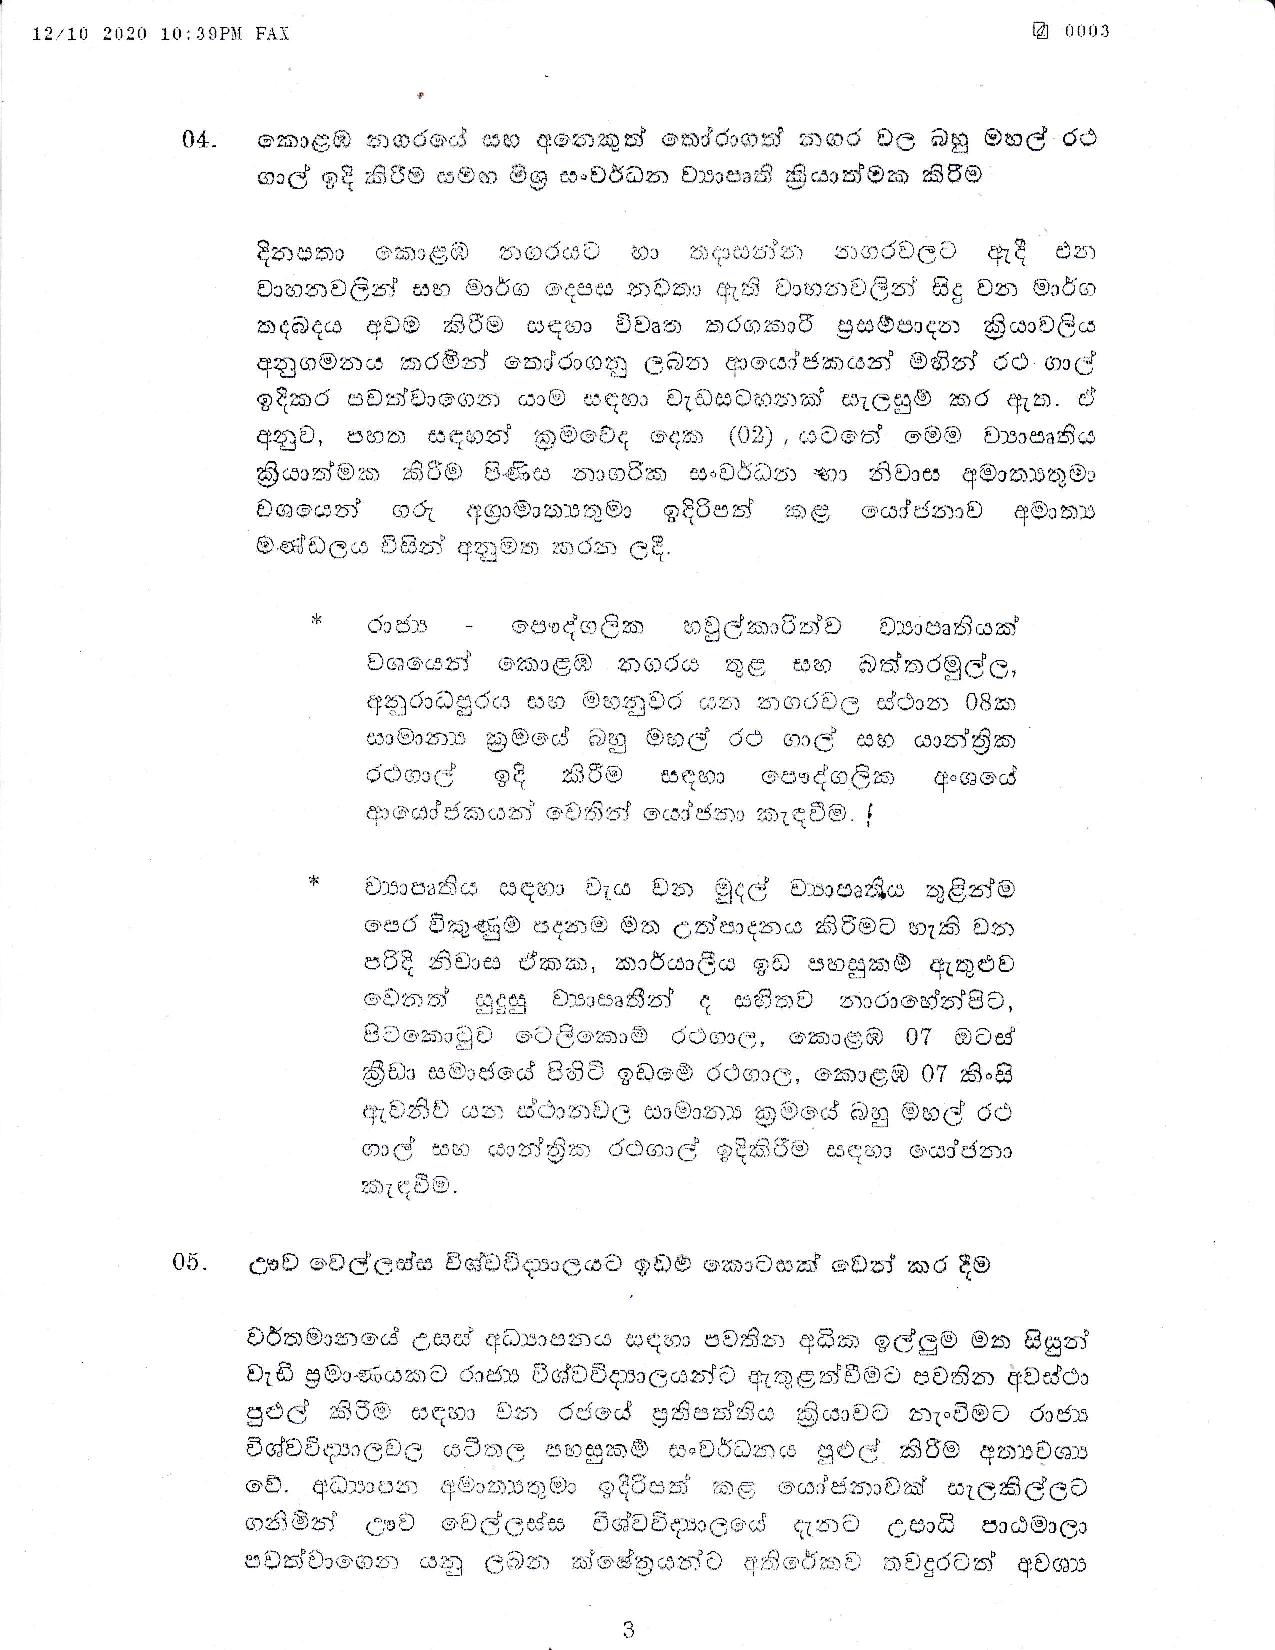 Cabinet Decision on 12.10.2020 page 003